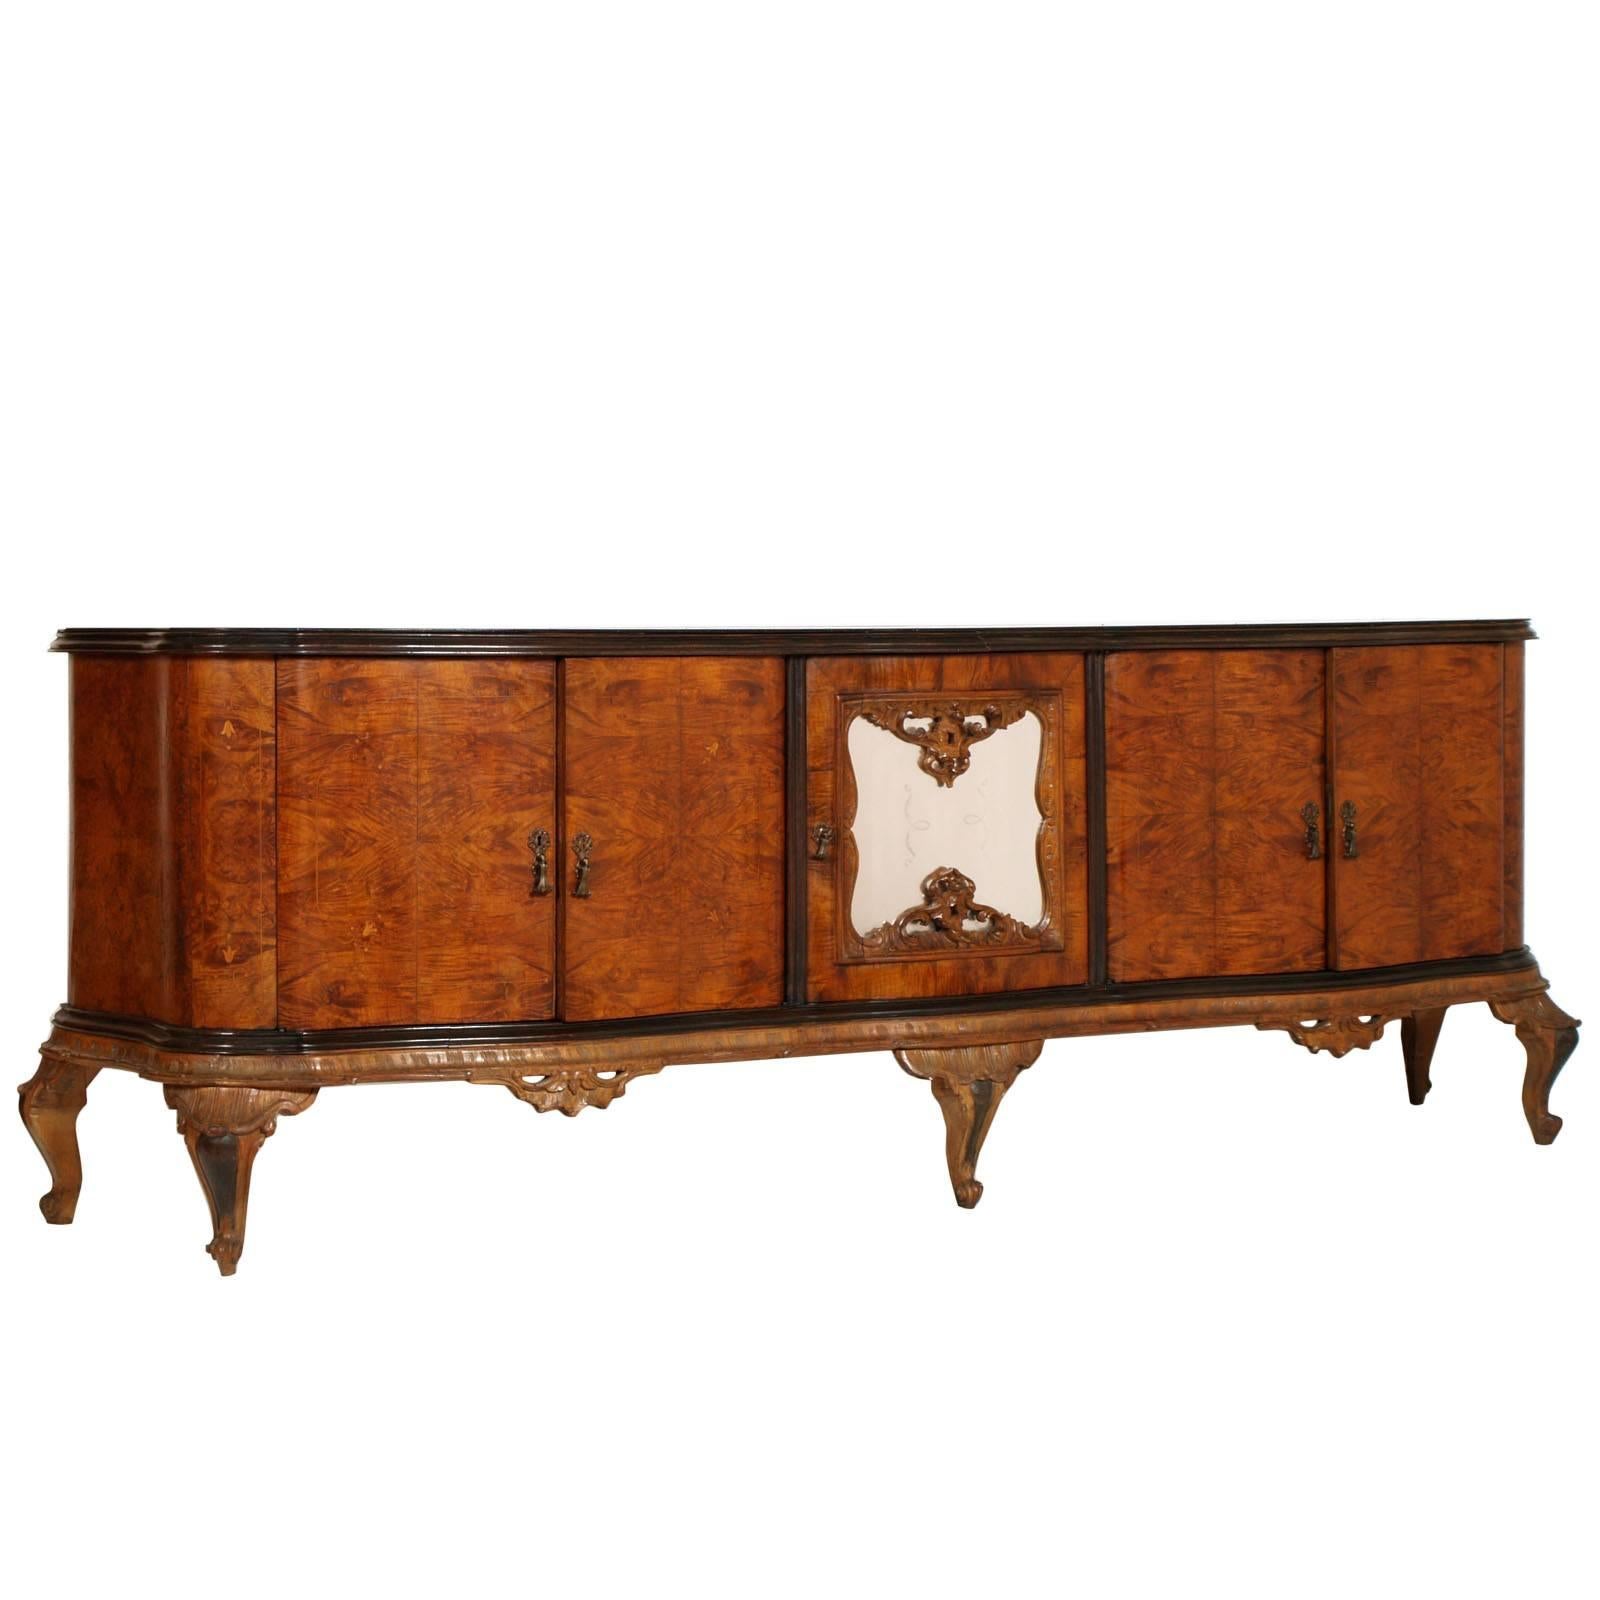 IMPORTANT: the mirror has been sold and only the sideboard remains

Early 20th century large Venetian Baroque Chippendale credenza sideboard with golden leaf mirror Fratelli Testolini attributable. Dark original glass top with elegant golden